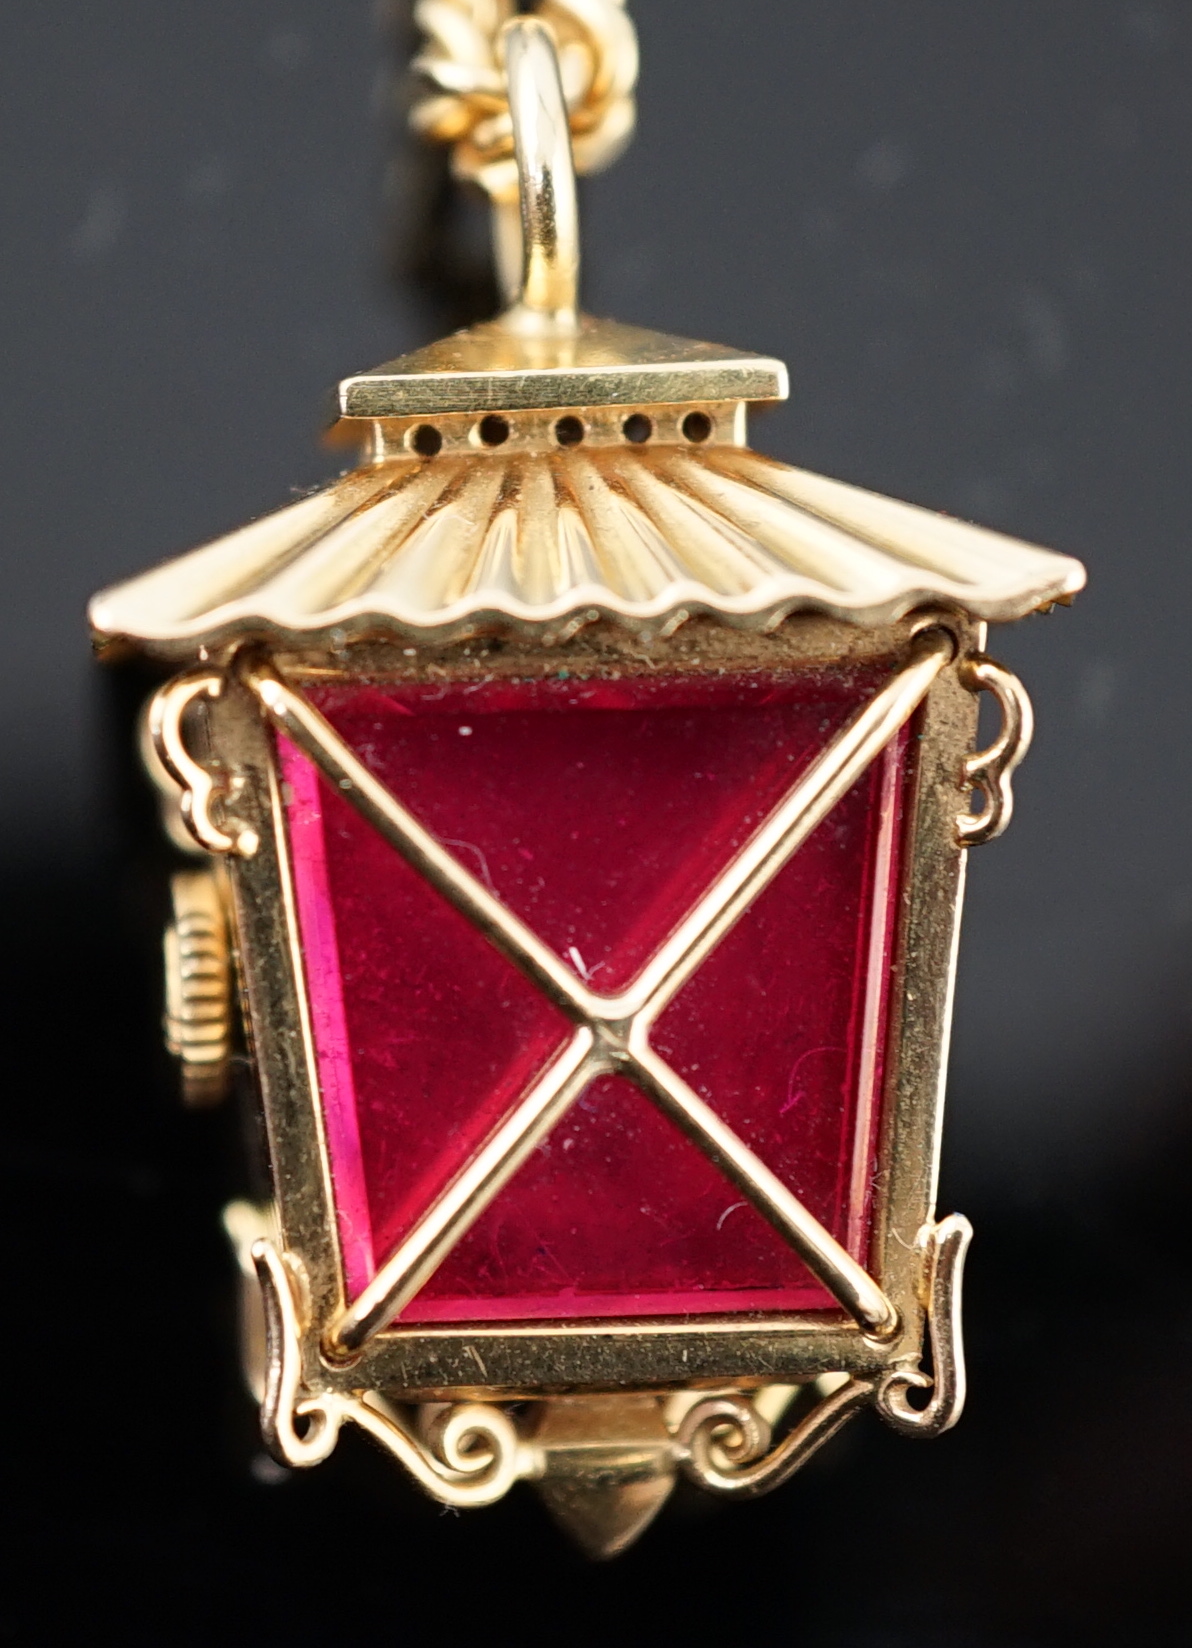 A lady's novelty gold Rolex pendant fob watch, modelled as a lantern, with baton numerals, together with an 18ct gold chain